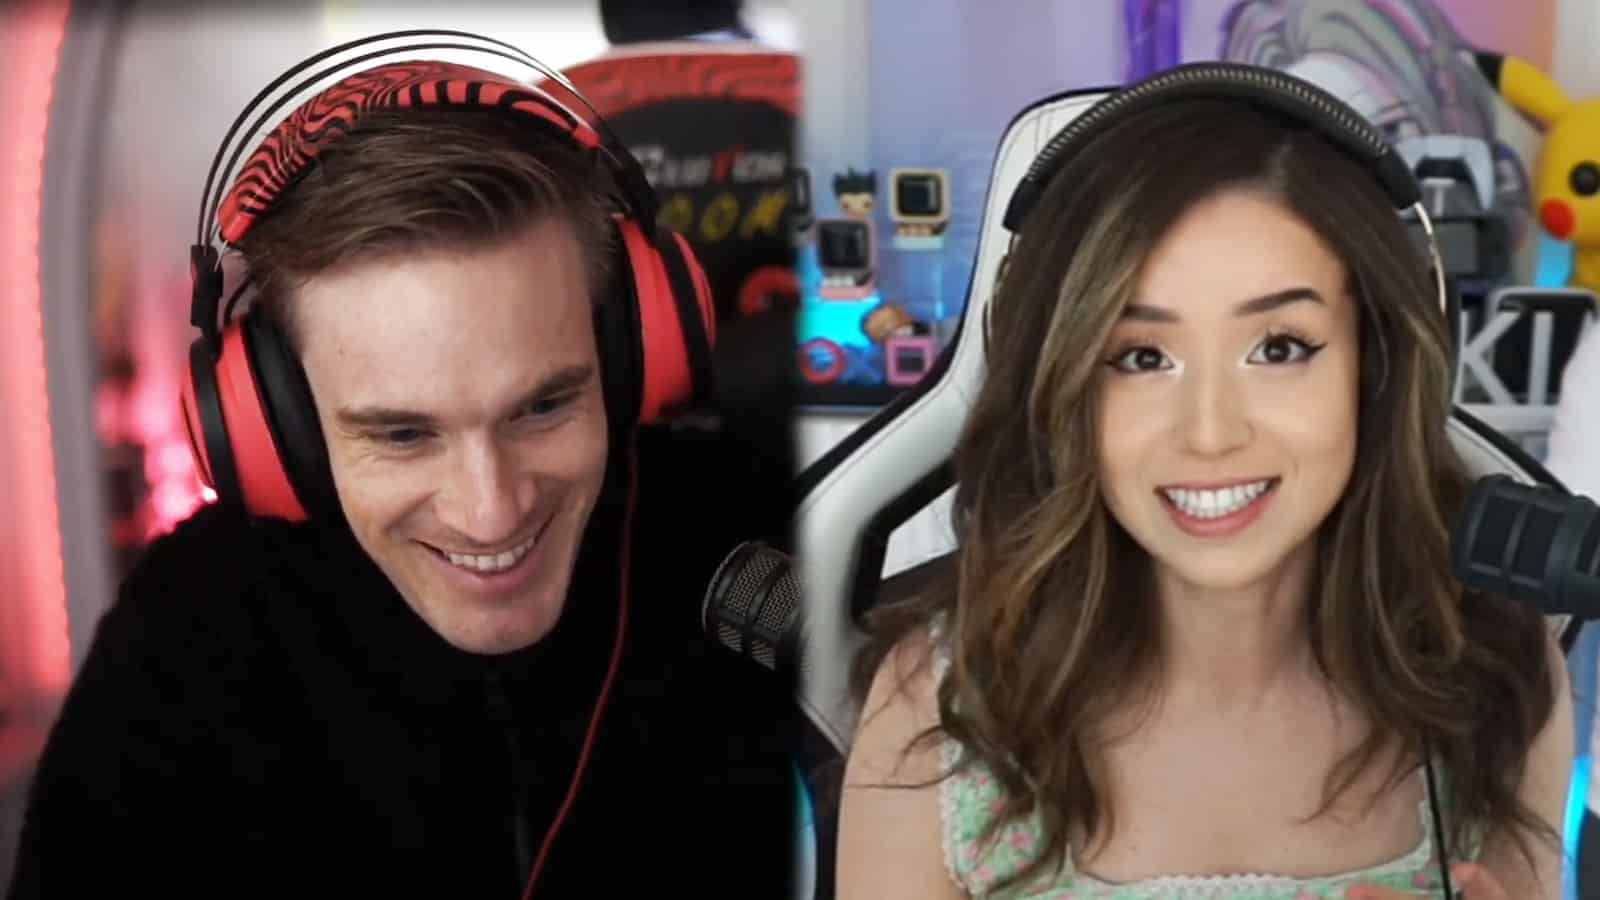 Pokimane hits back at claims shes lazy after Avatar The Last Airbender  Twitch ban  Dexerto